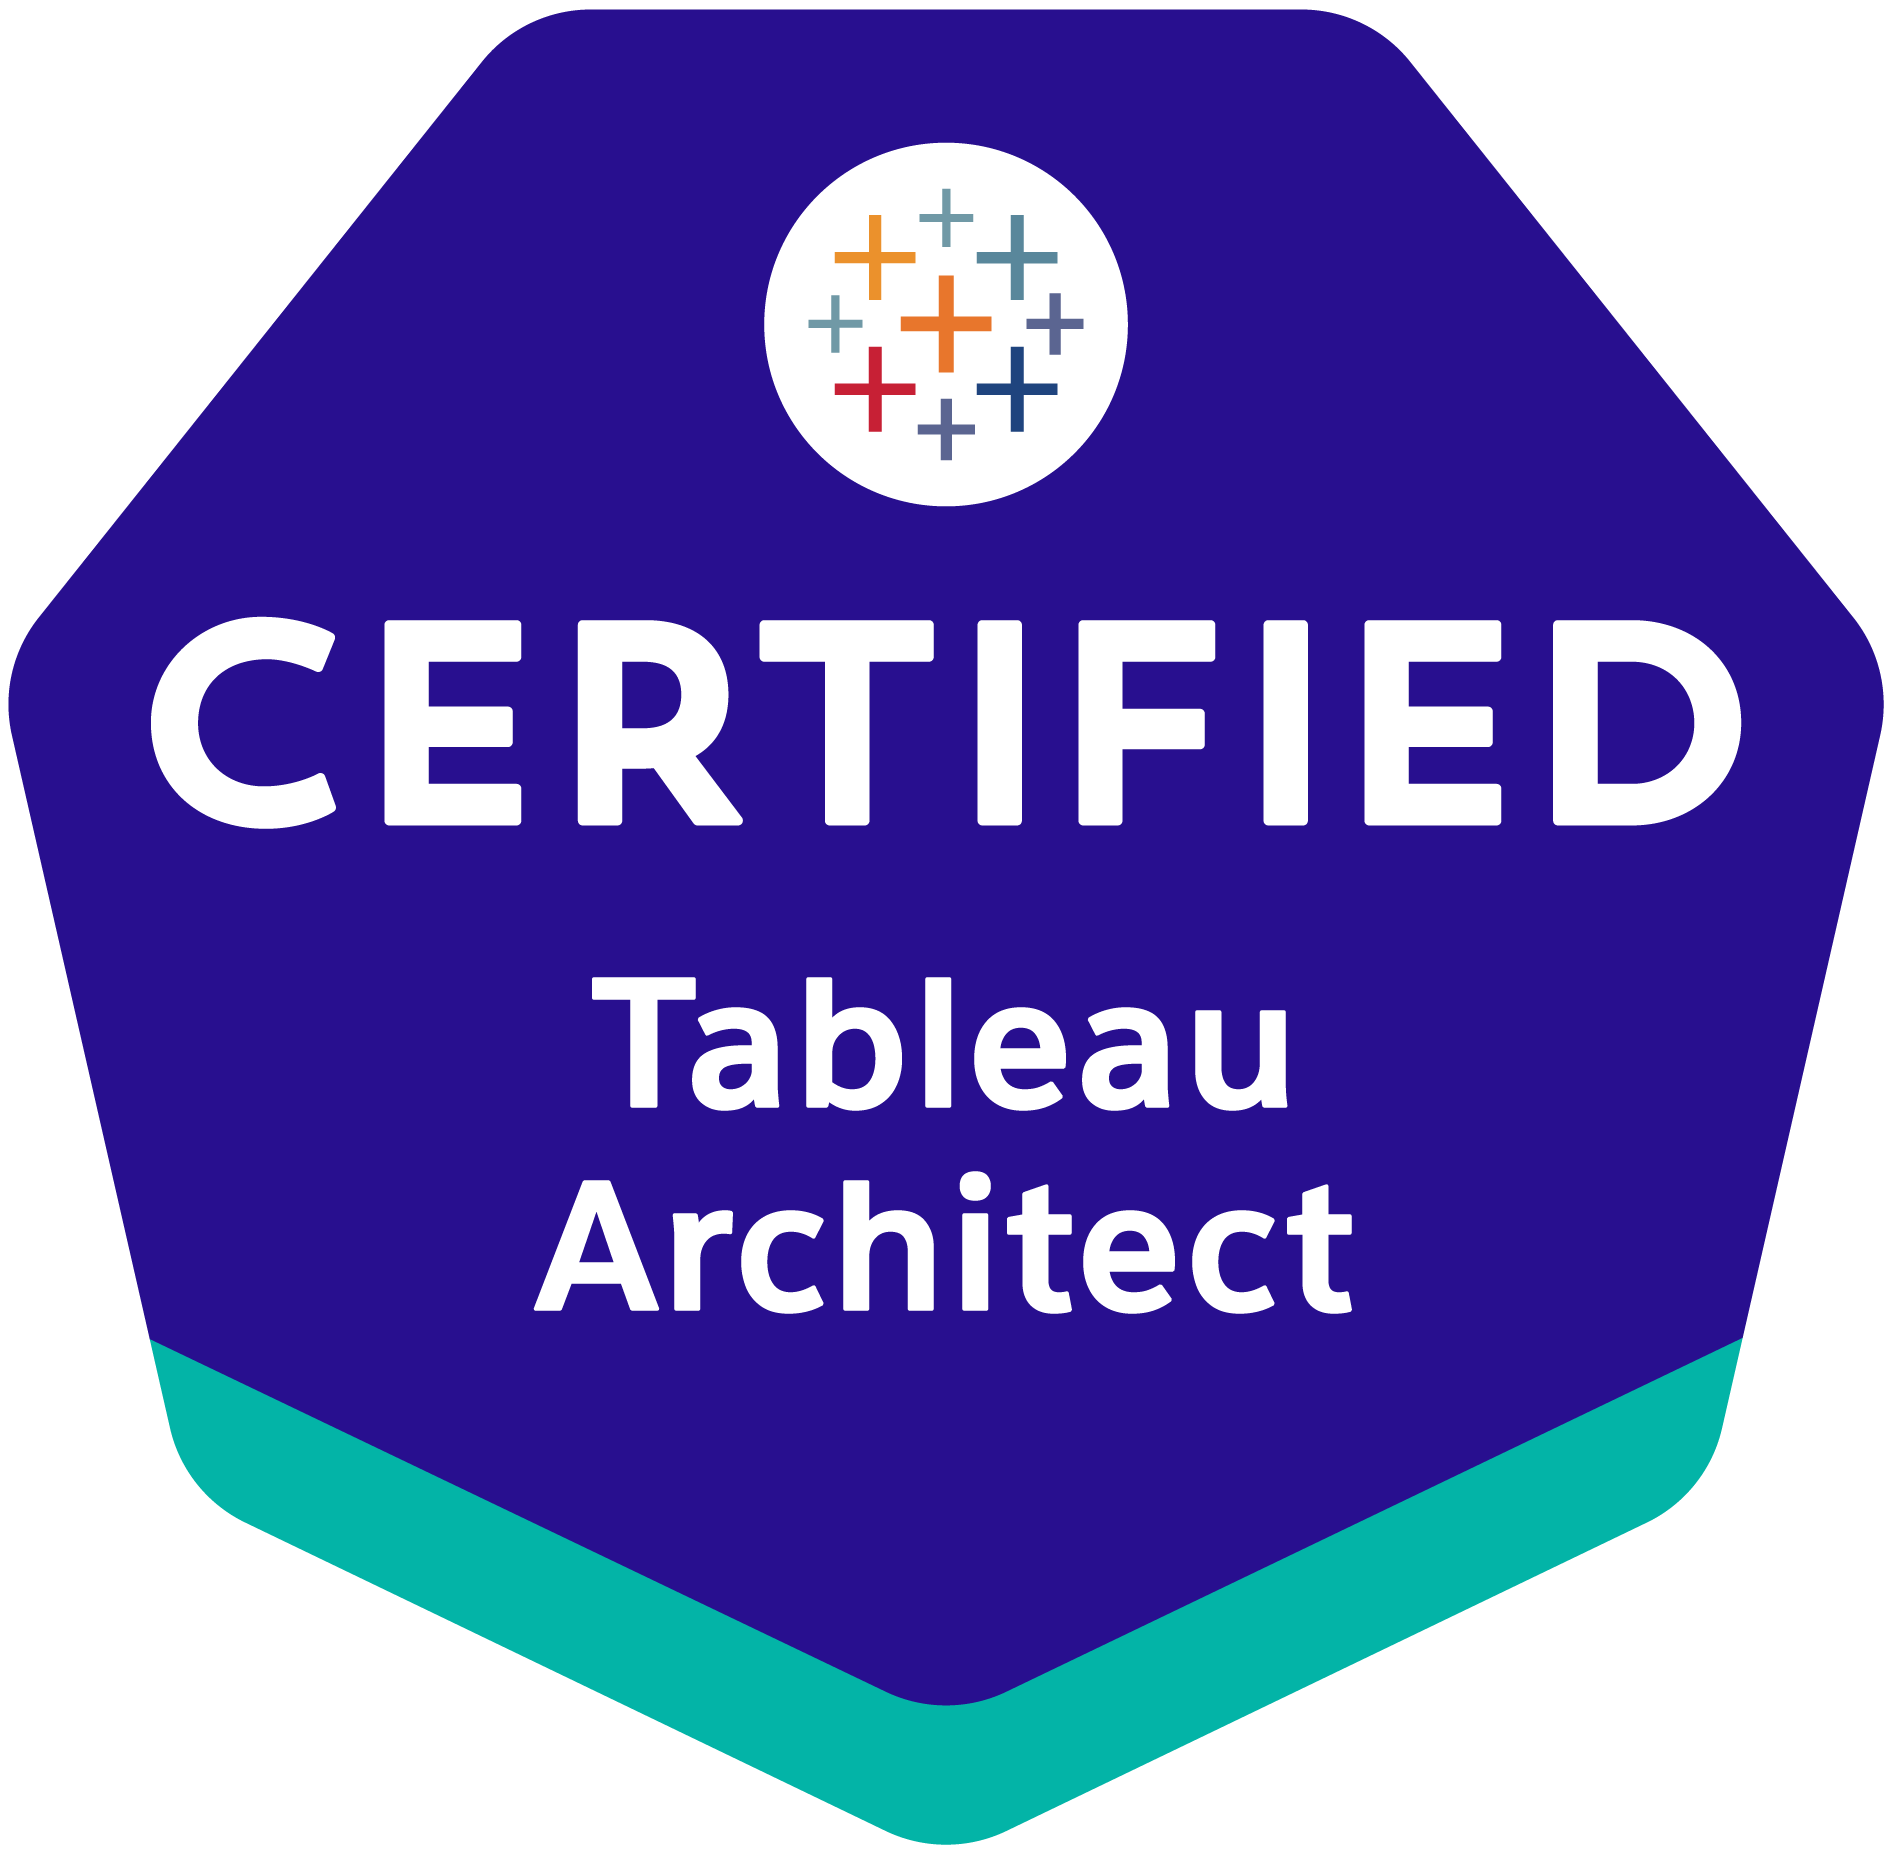 Navigate to Tableau Certified Architect